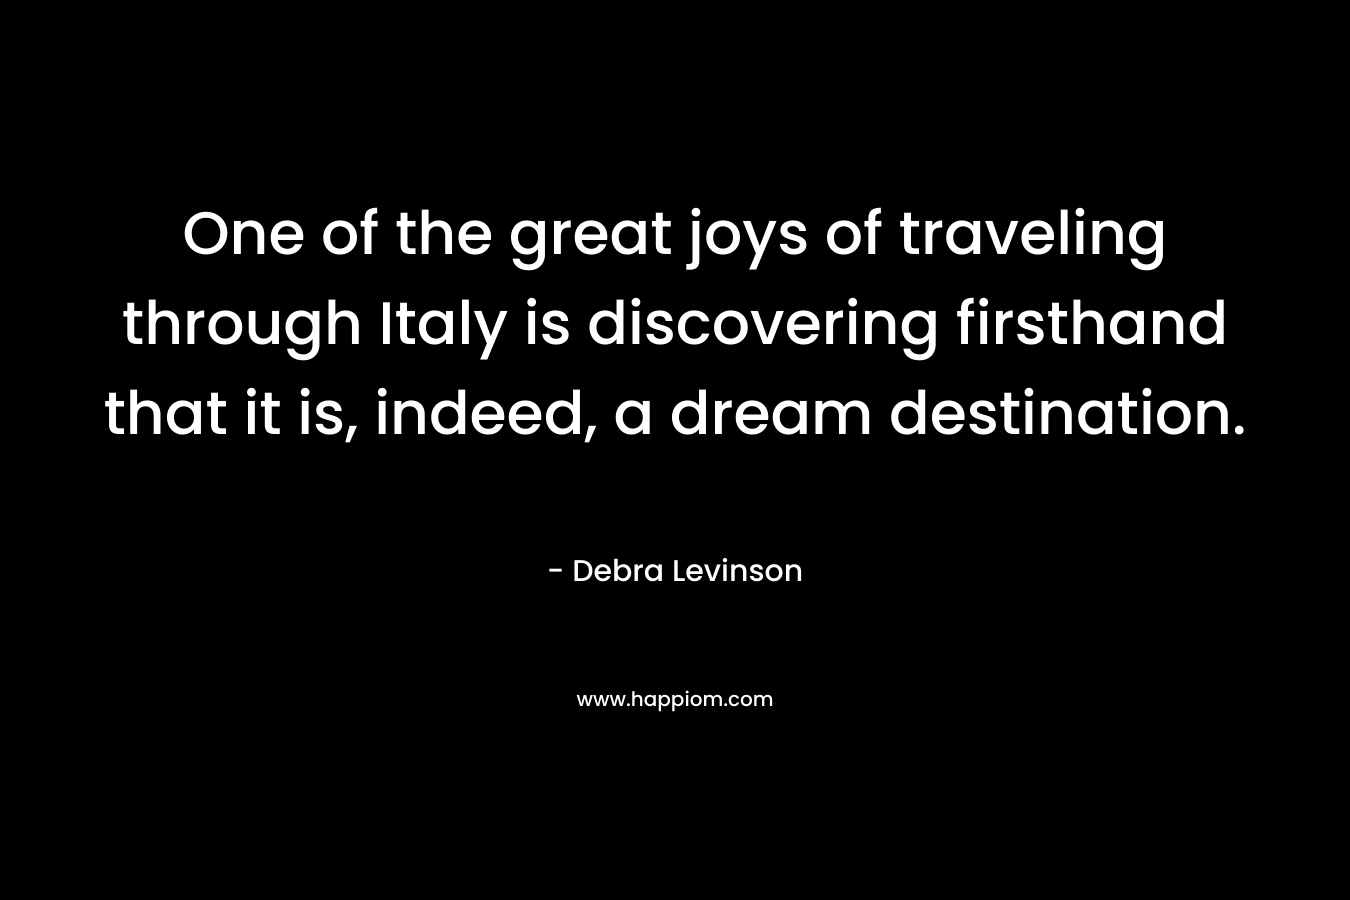 One of the great joys of traveling through Italy is discovering firsthand that it is, indeed, a dream destination. – Debra Levinson